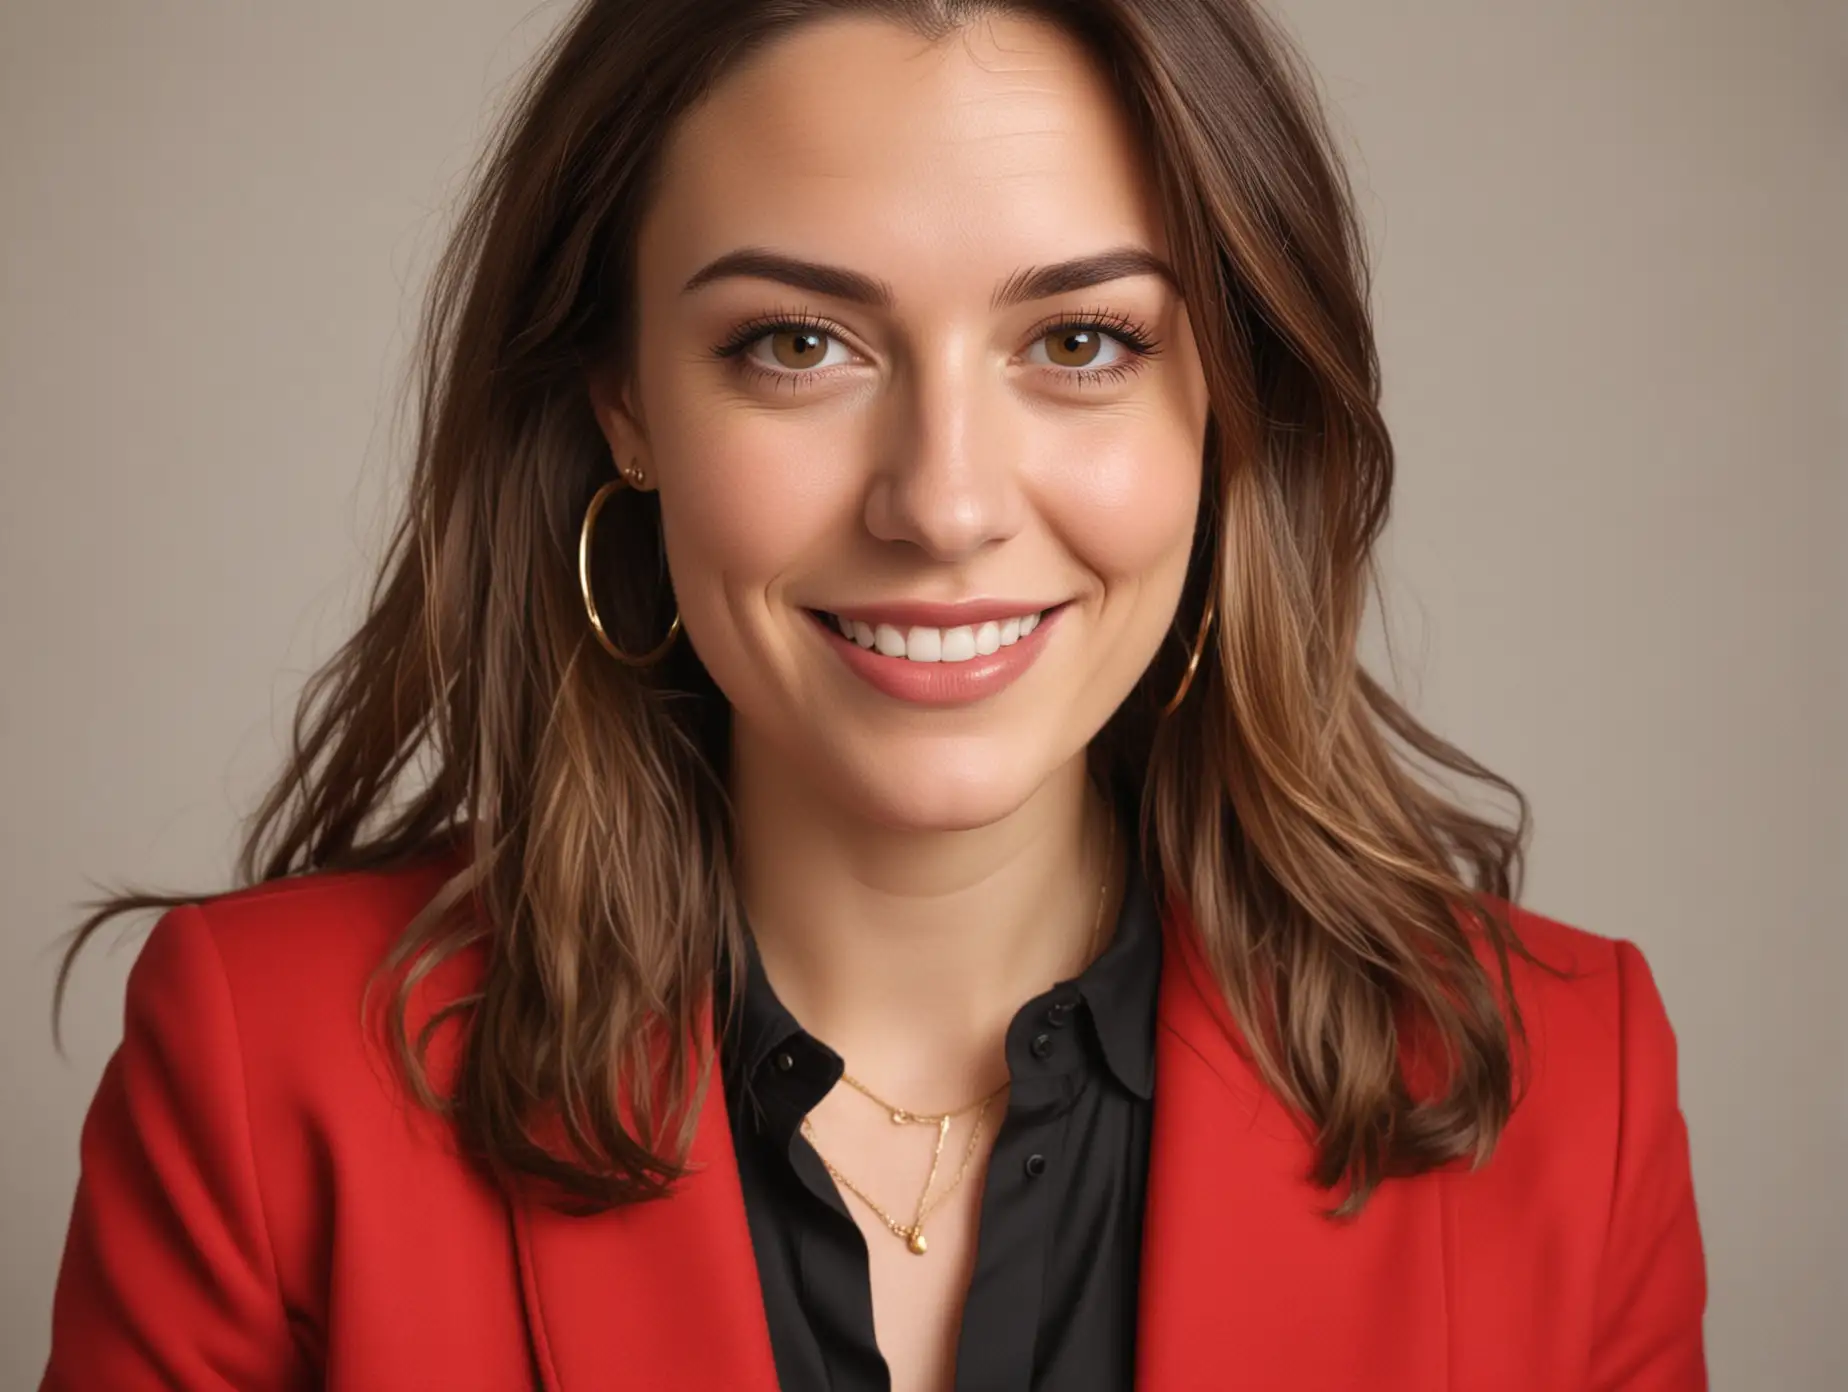 Up close face of 30 year old white woman with long brown hair parted to the right, wearing a red blazer, hoop earrings, simple gold necklace, plain black shirt and black dress pants. She is smiling at camera with eyebrows raised. She might be of British, Irish or Danish descent.